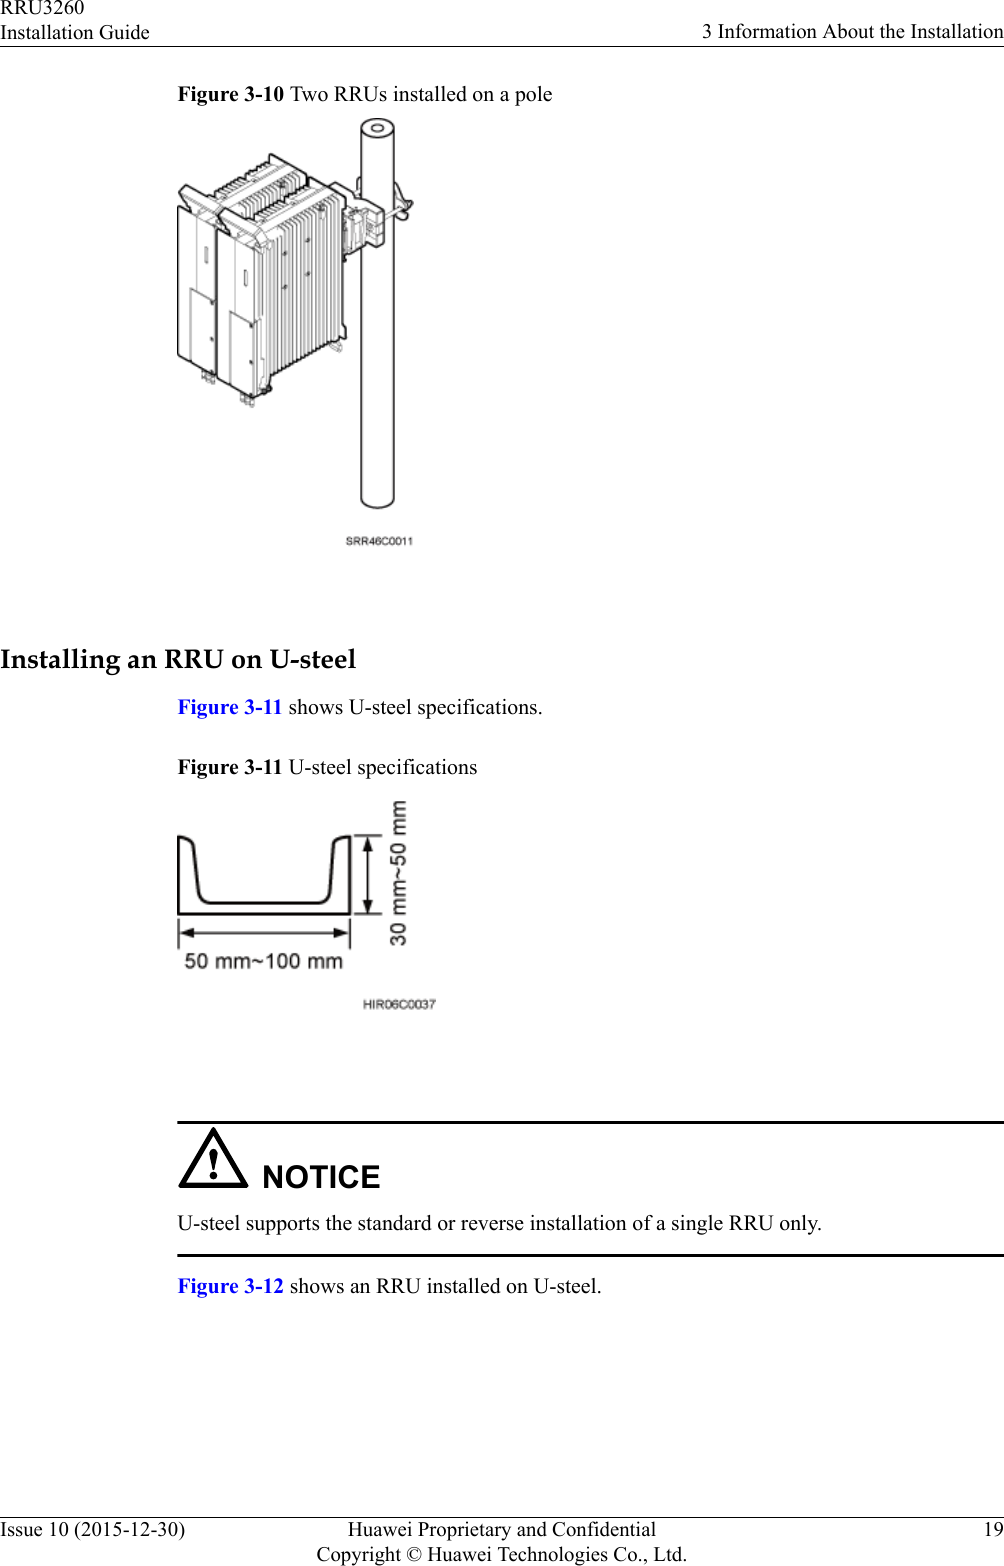 Figure 3-10 Two RRUs installed on a pole Installing an RRU on U-steelFigure 3-11 shows U-steel specifications.Figure 3-11 U-steel specifications NOTICEU-steel supports the standard or reverse installation of a single RRU only.Figure 3-12 shows an RRU installed on U-steel.RRU3260Installation Guide 3 Information About the InstallationIssue 10 (2015-12-30) Huawei Proprietary and ConfidentialCopyright © Huawei Technologies Co., Ltd.19